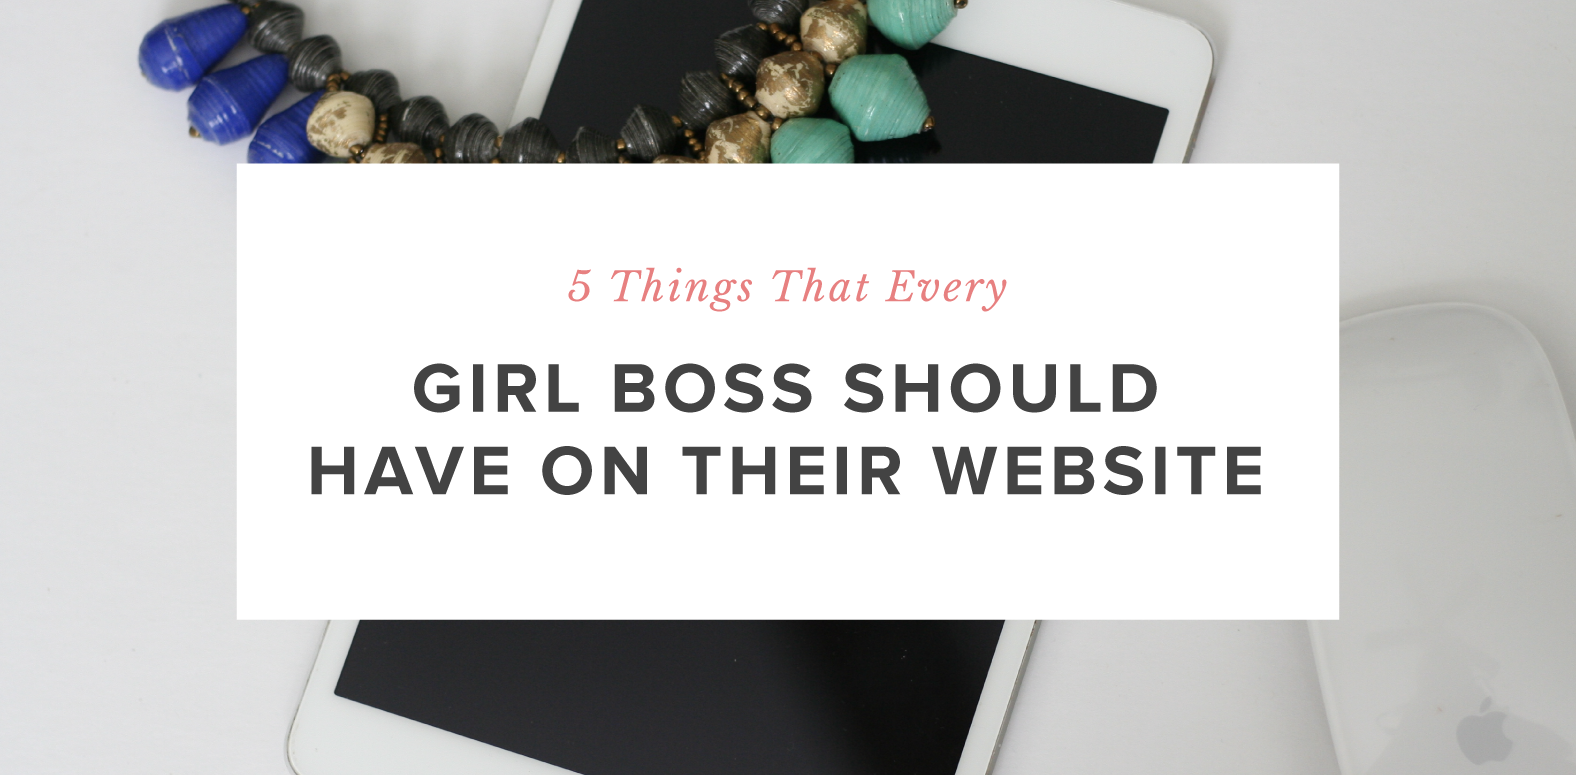 5 Things that Every Girl Boss Should Have on Their Website